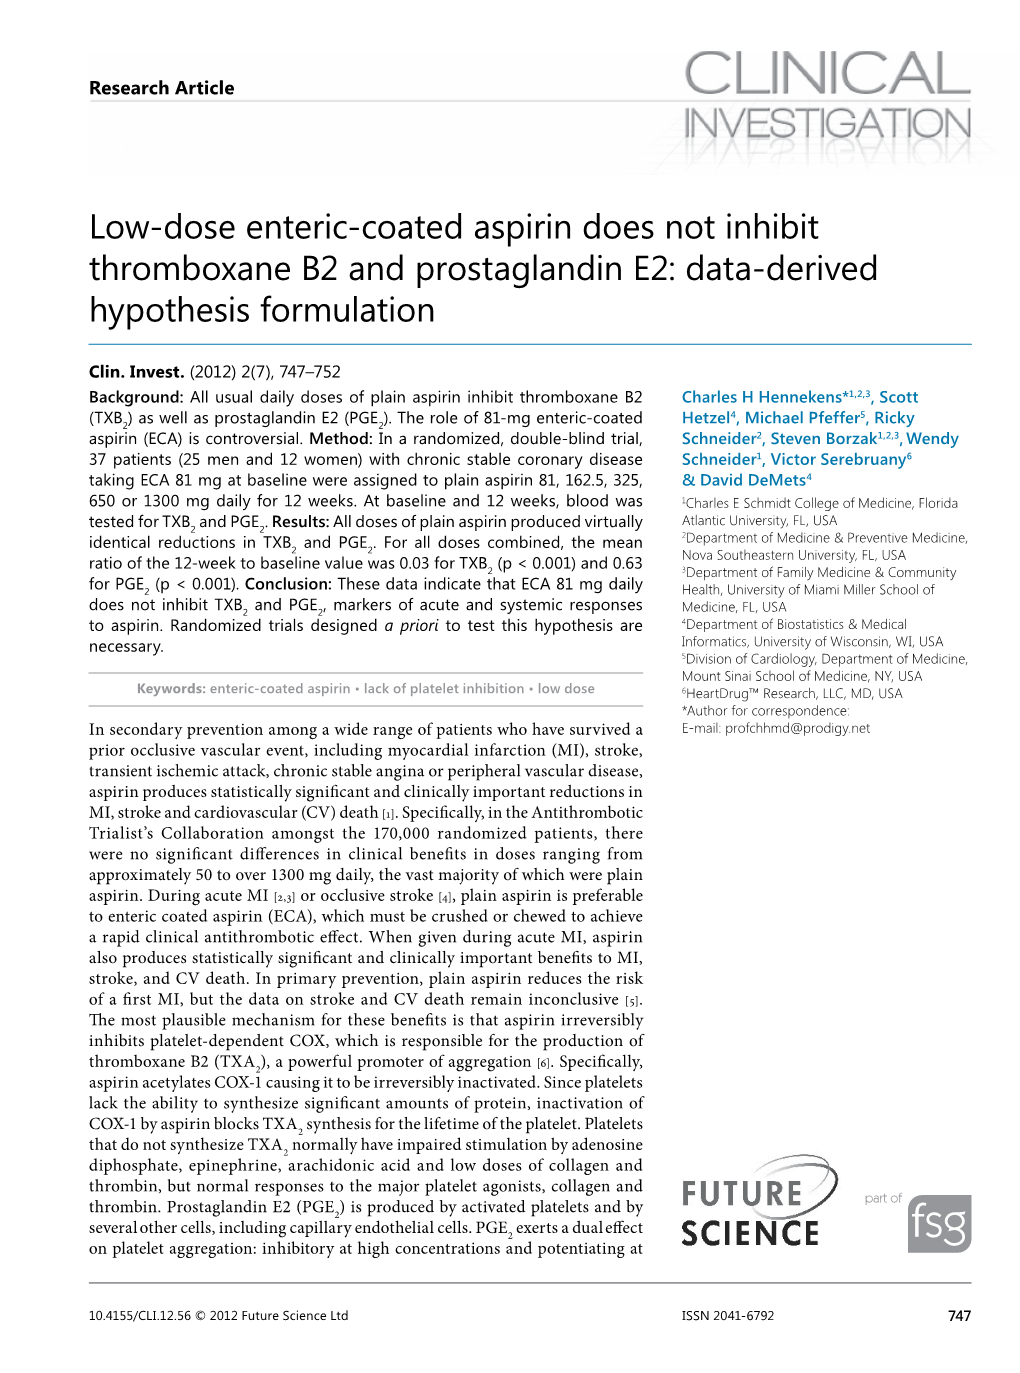 Low-Dose Enteric-Coated Aspirin Does Not Inhibit Thromboxane B2 and Prostaglandin E2: Data-Derived Hypothesis Formulation